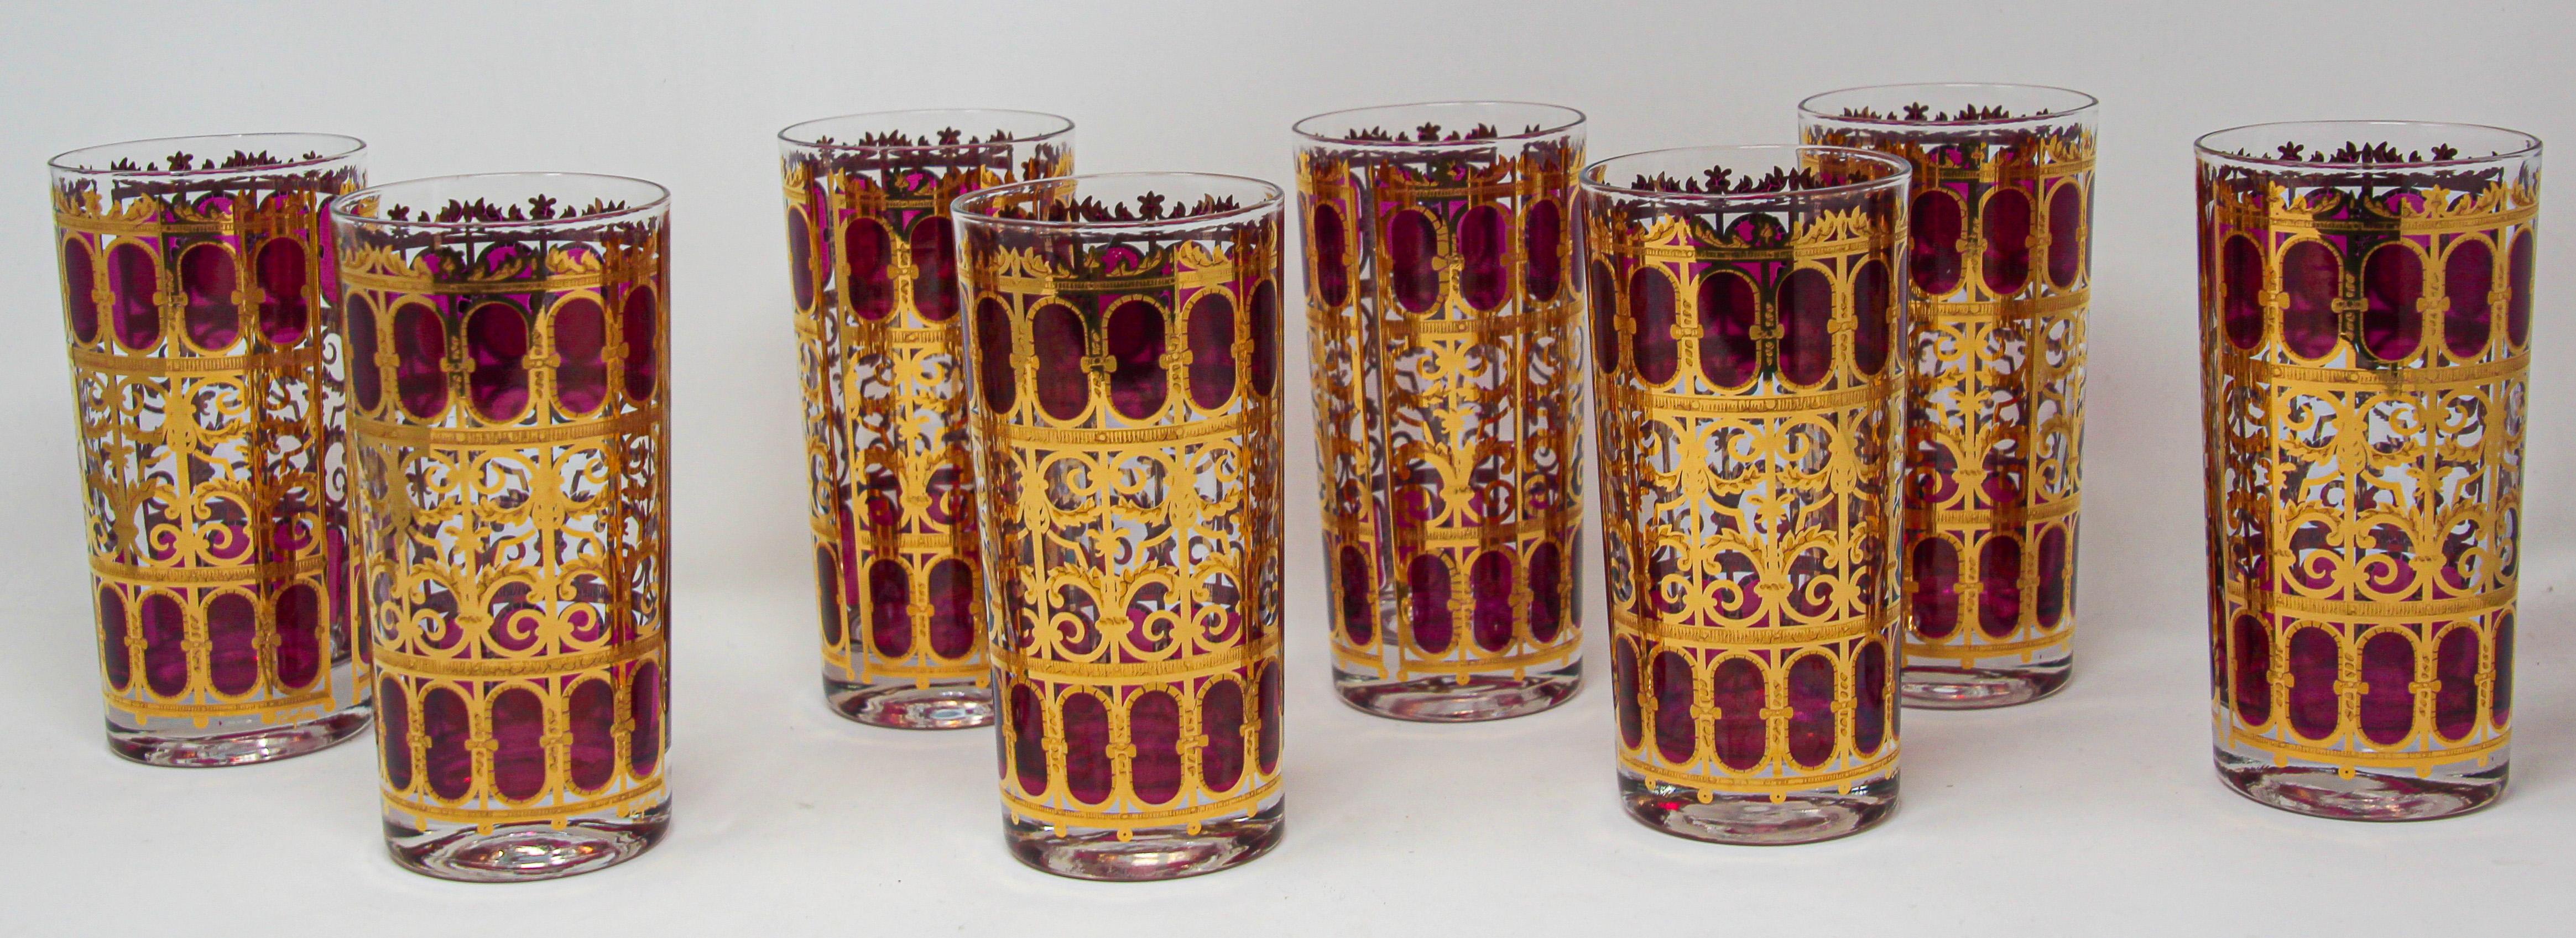 Elegant vintage midcentury Culver barware highball glasses with Valencia pattern in a gold leaf finish.
Midcentury American highball glassware set of 1960s vintage Culver LTD “Cranberry” highball glasses, 22-karat gold, signed by Culver